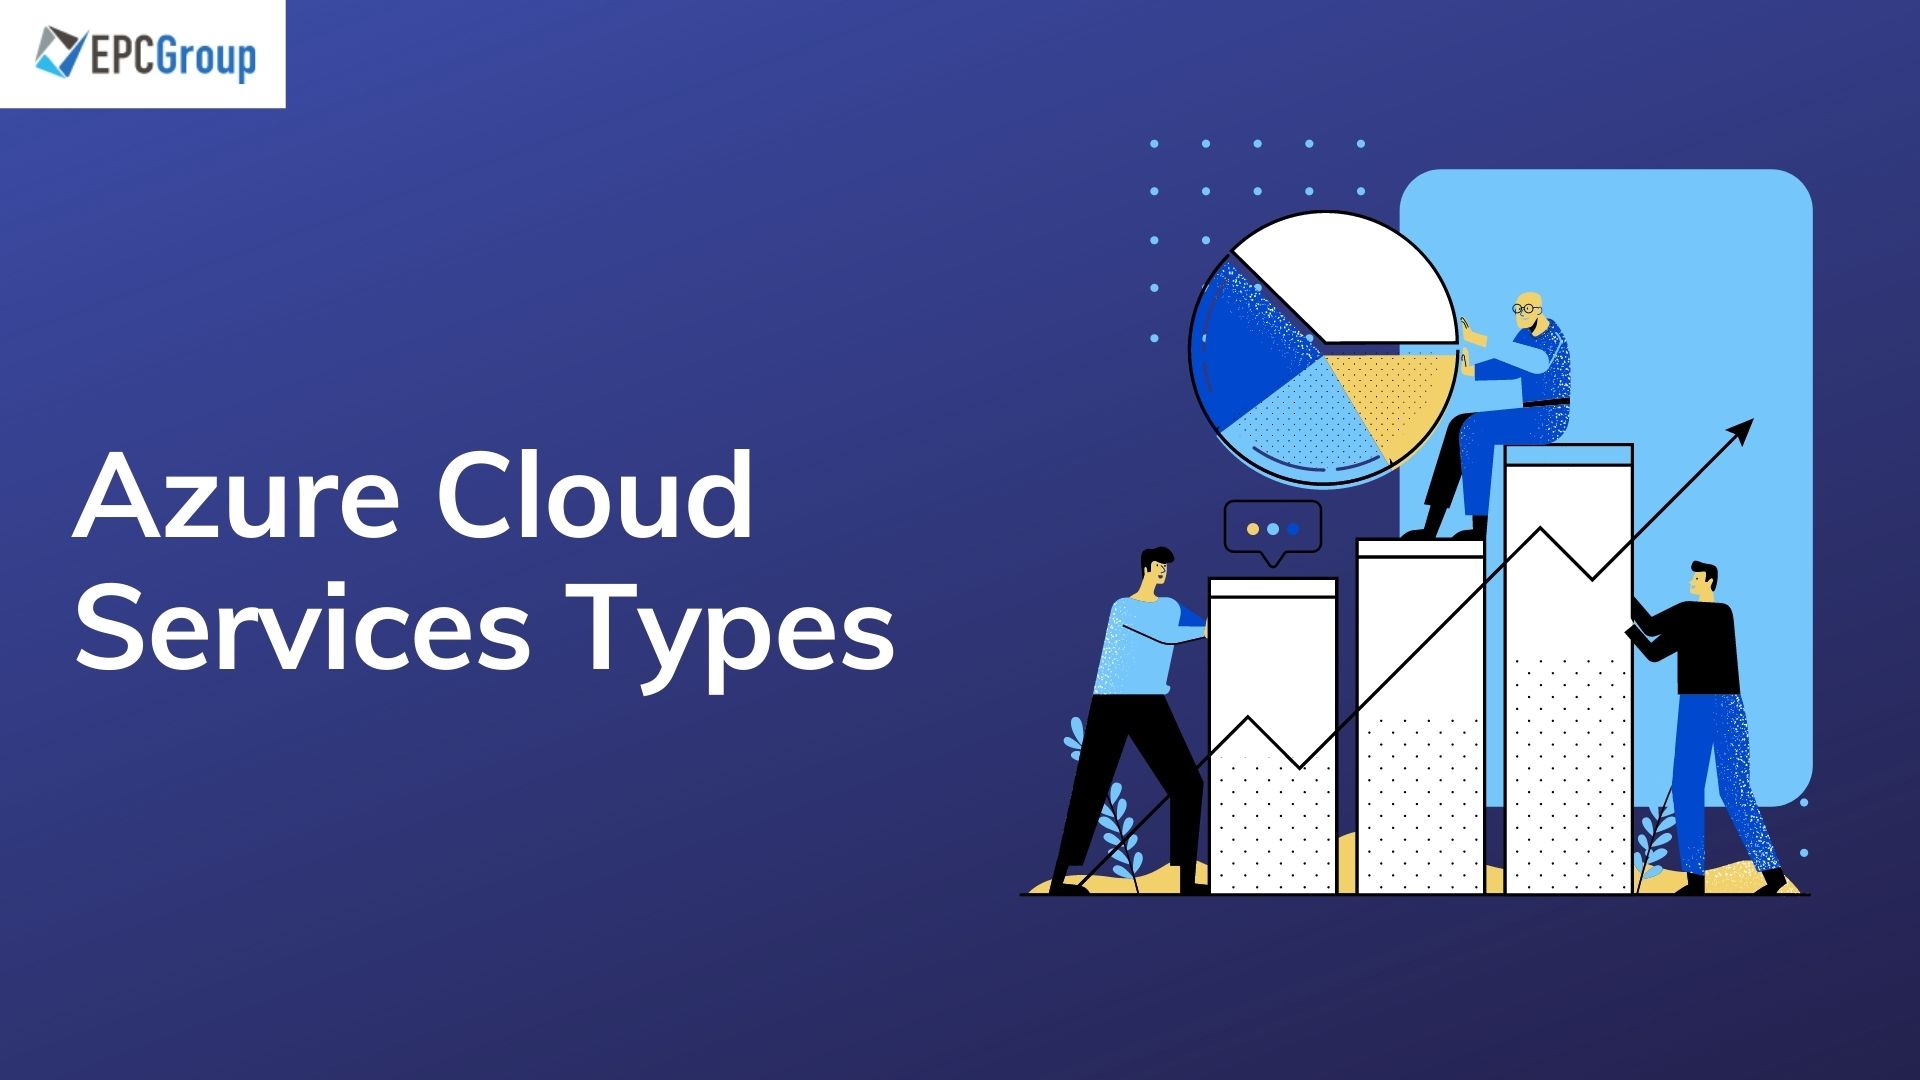 What Are Azure Cloud Services Types